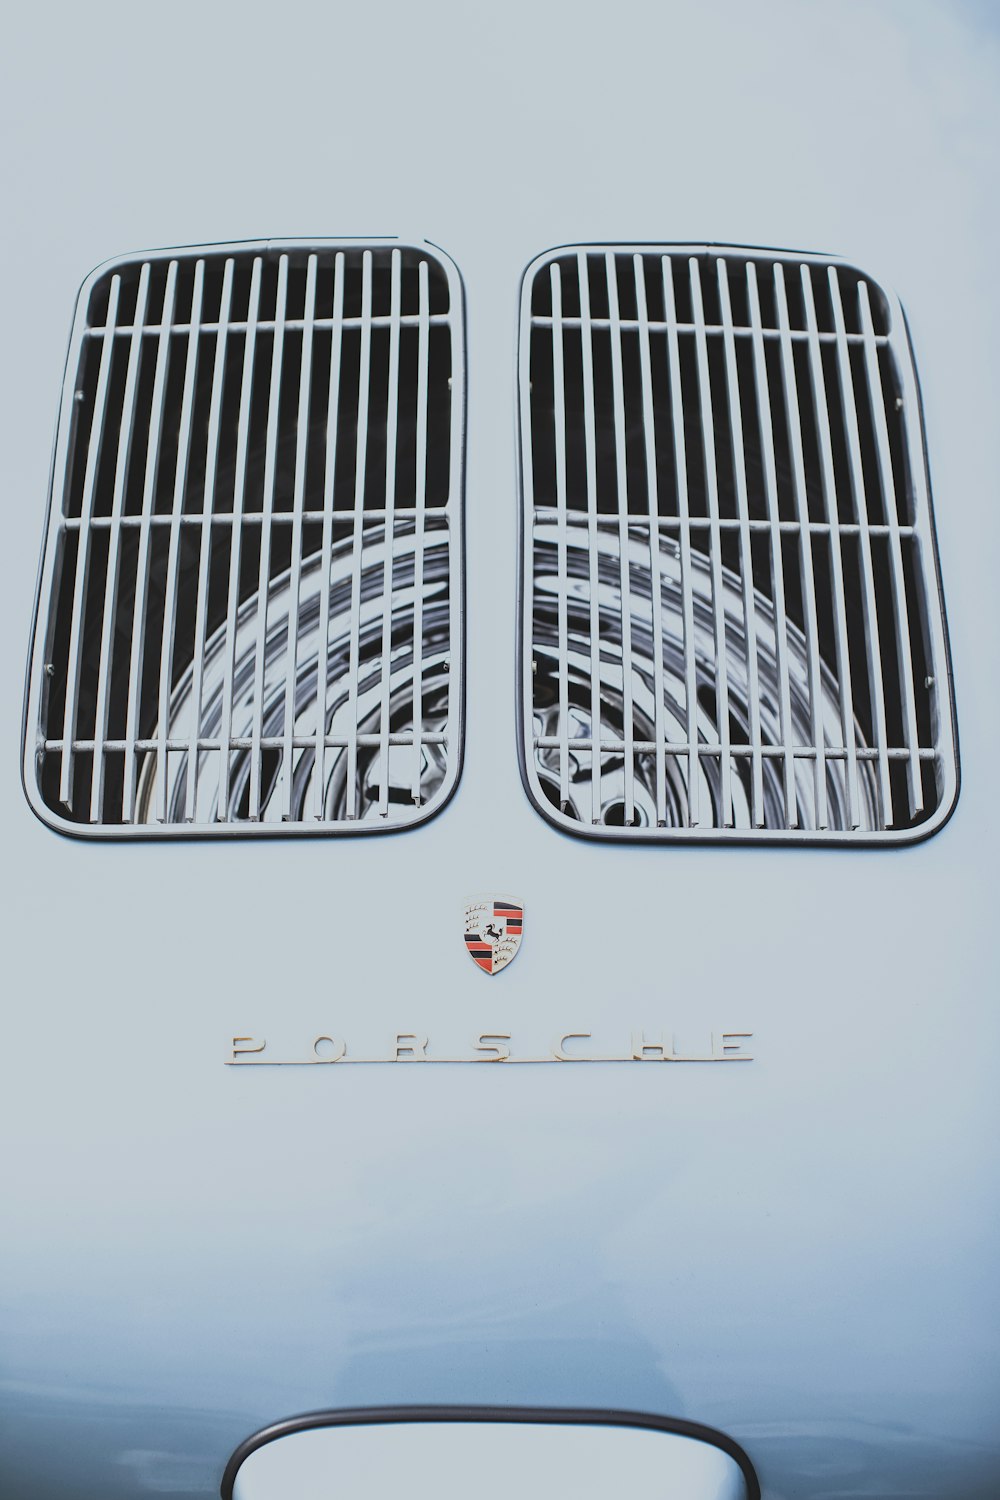 a close up of the front grills of a sports car